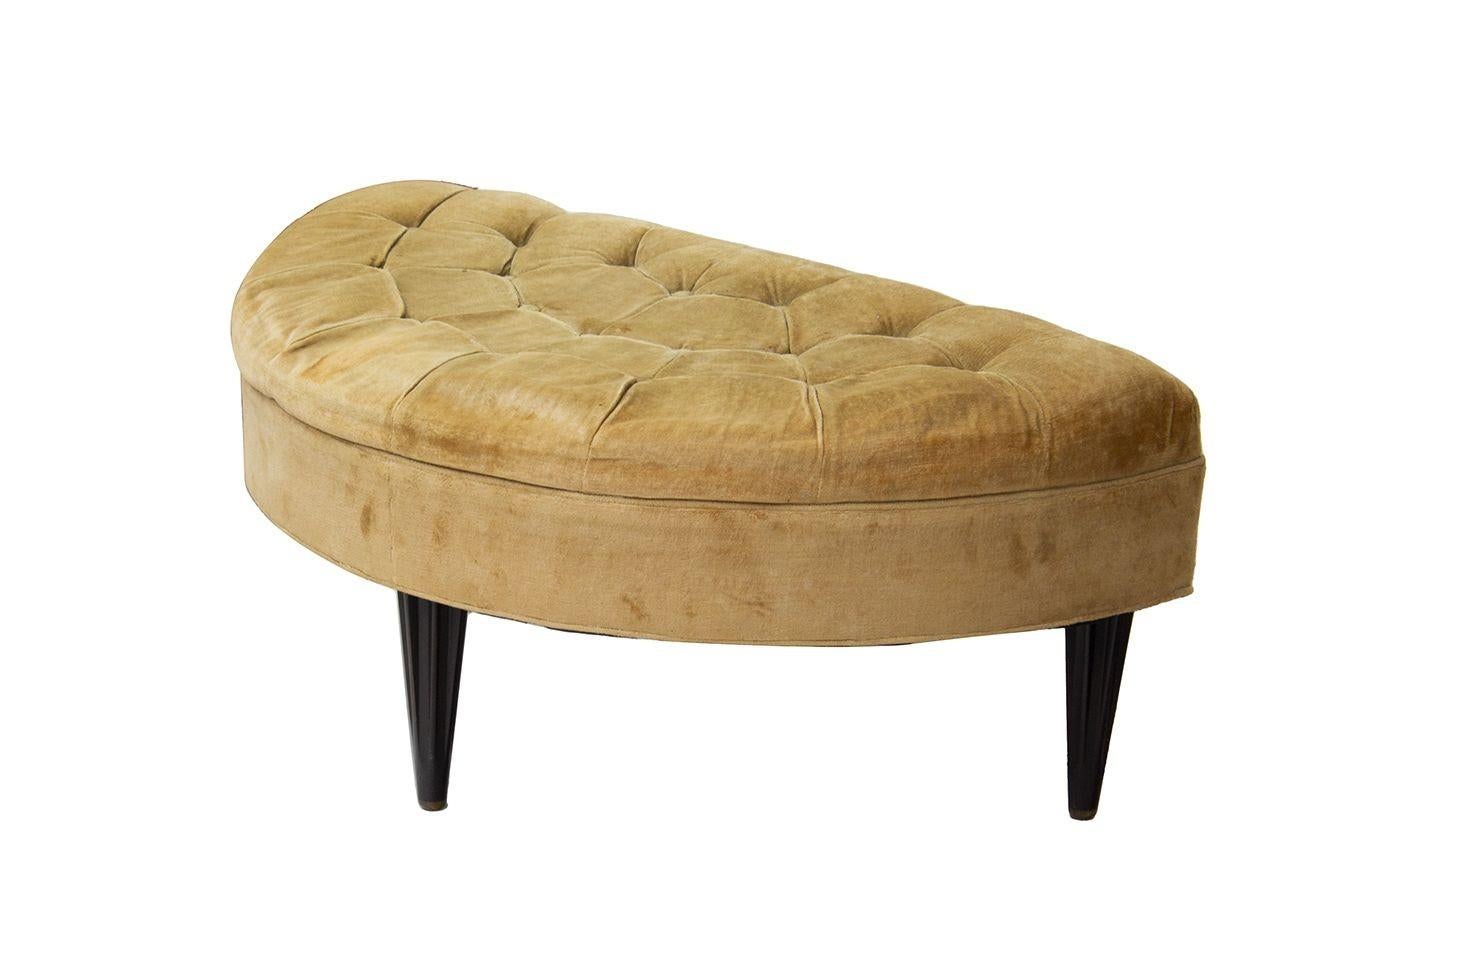 Tufted Demilune Ottoman by Dunbar with Fluted Legs In Distressed Condition For Sale In Grand Rapids, MI